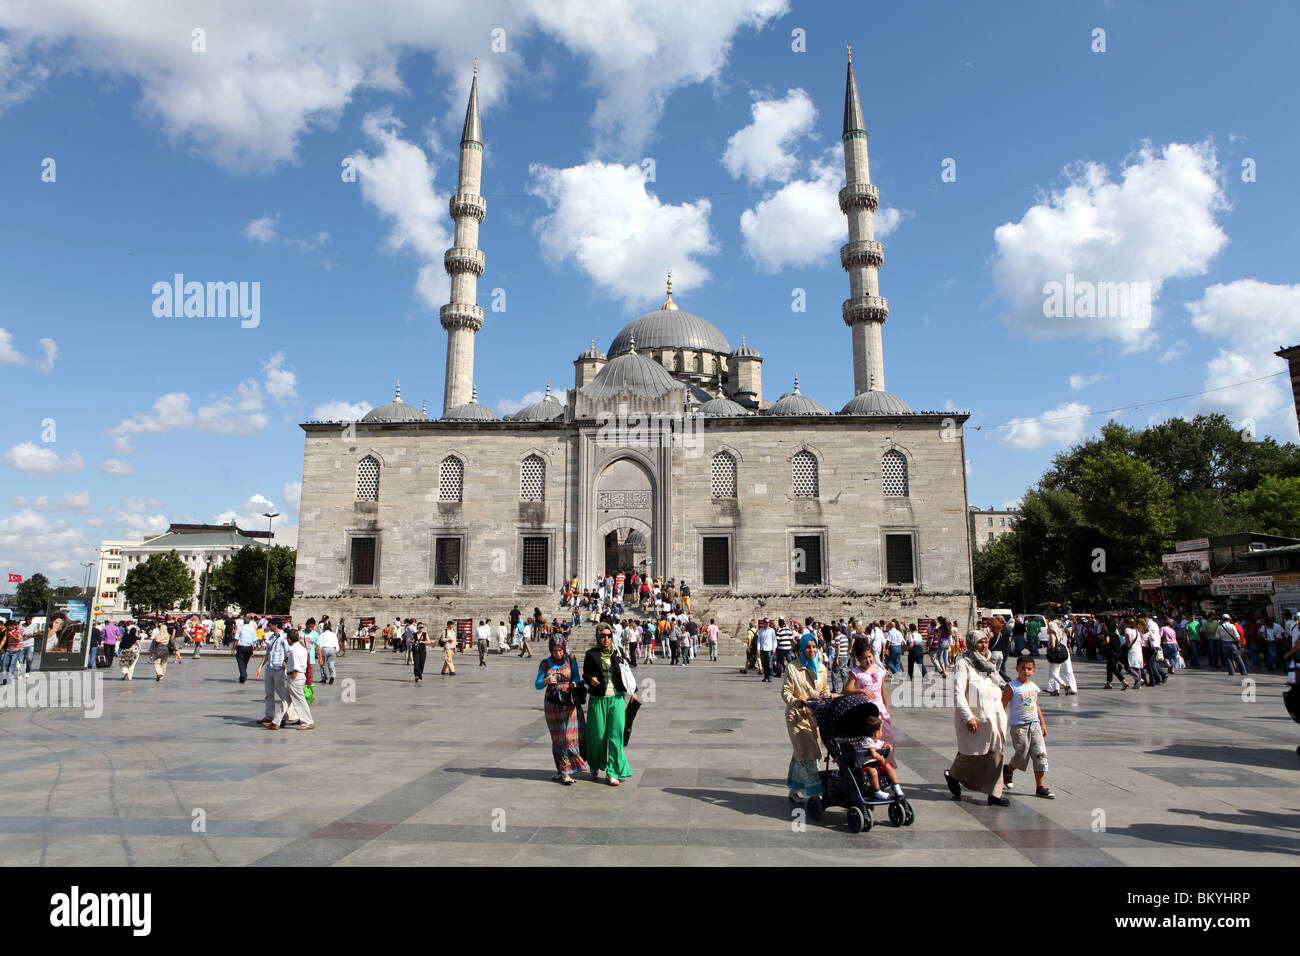 The Yeni Mosque, New Mosque or Mosque of the Valide Sultan in the Eminonu District of Istanbul, Turkey. Stock Photo